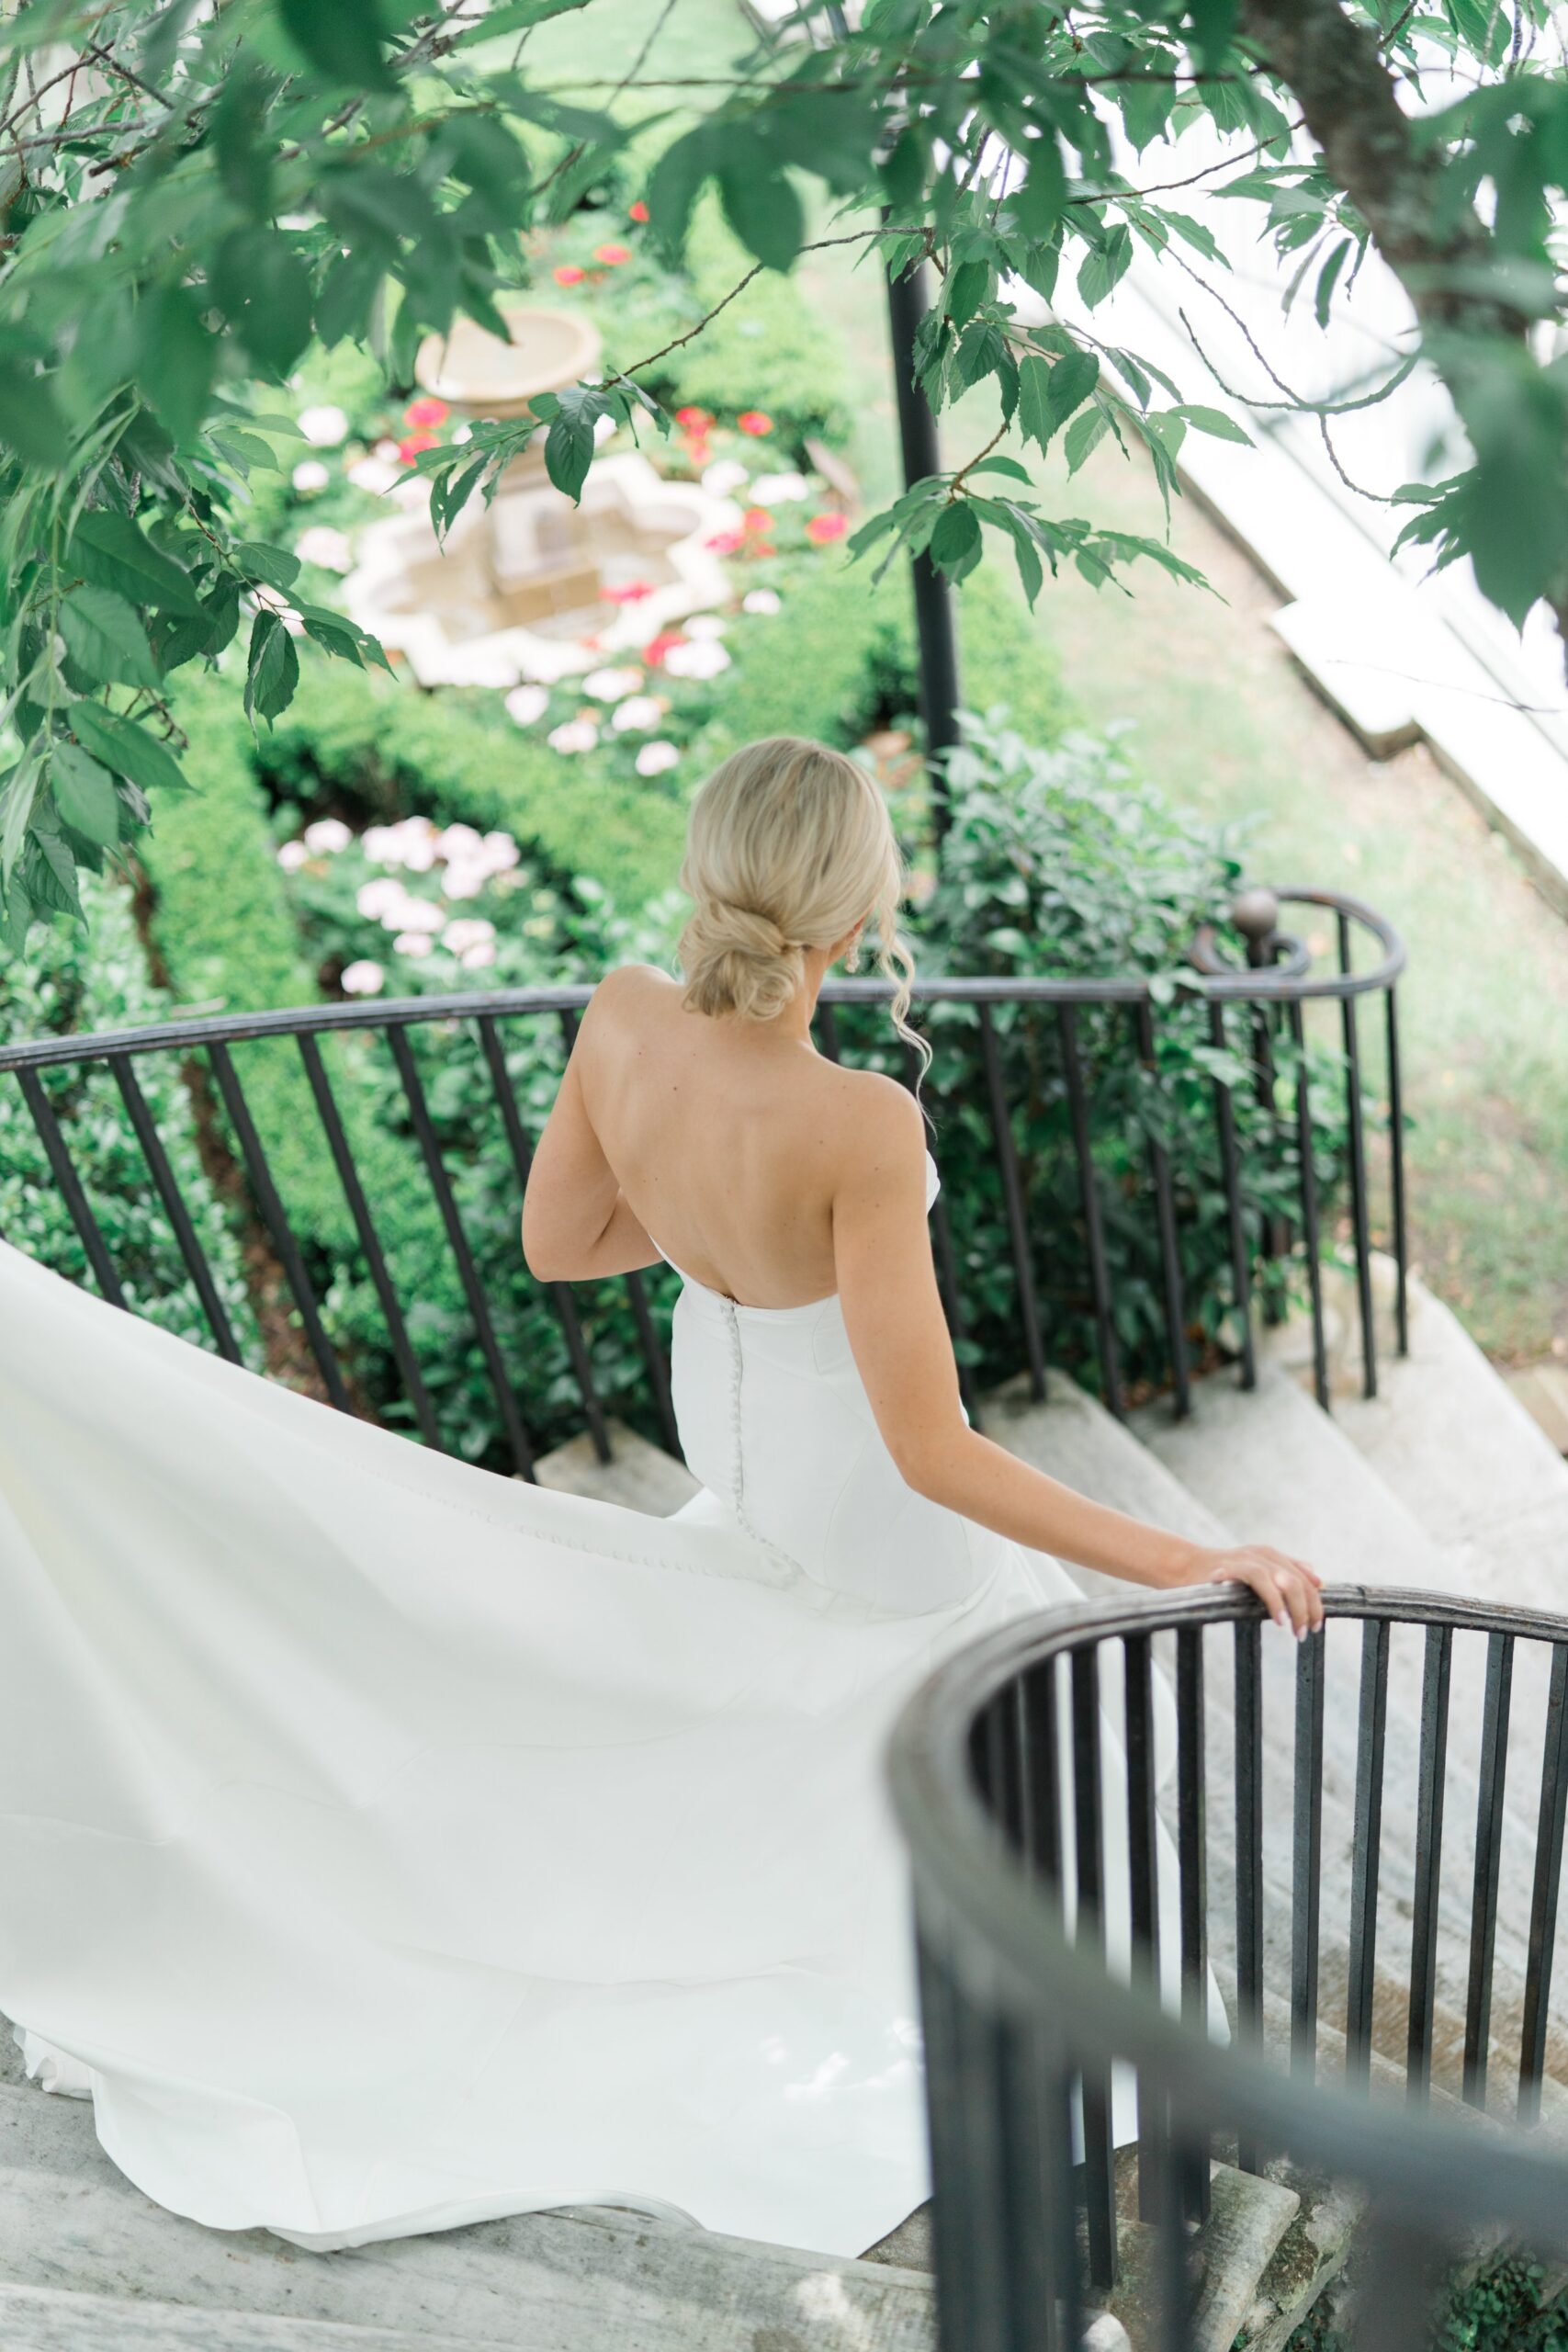 Bride descends stairs at Charleston spring wedding with fountain and garden with greenery.